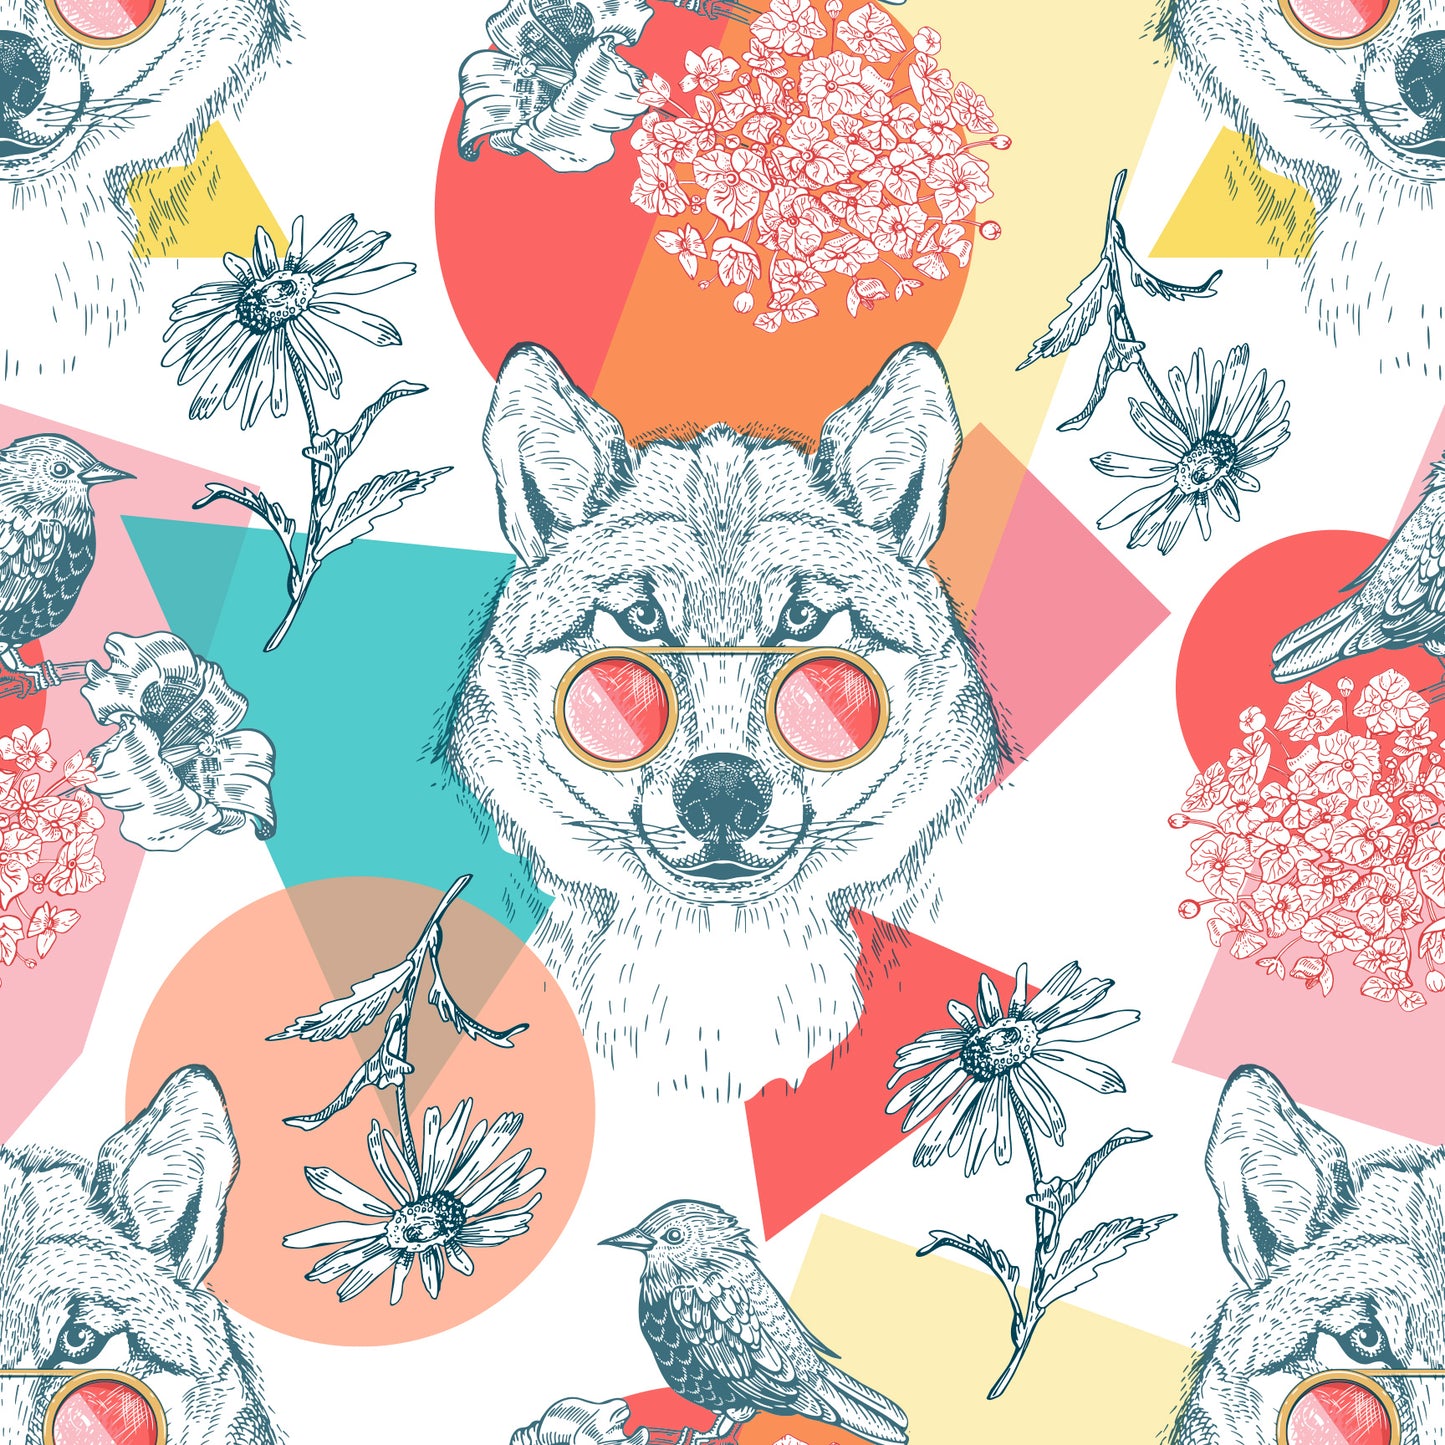 Up close pop art wallpaper featuring daisies, flowers, birds, wolf in sunglasses with shades of yellow, peach, pink, red, orange and teal